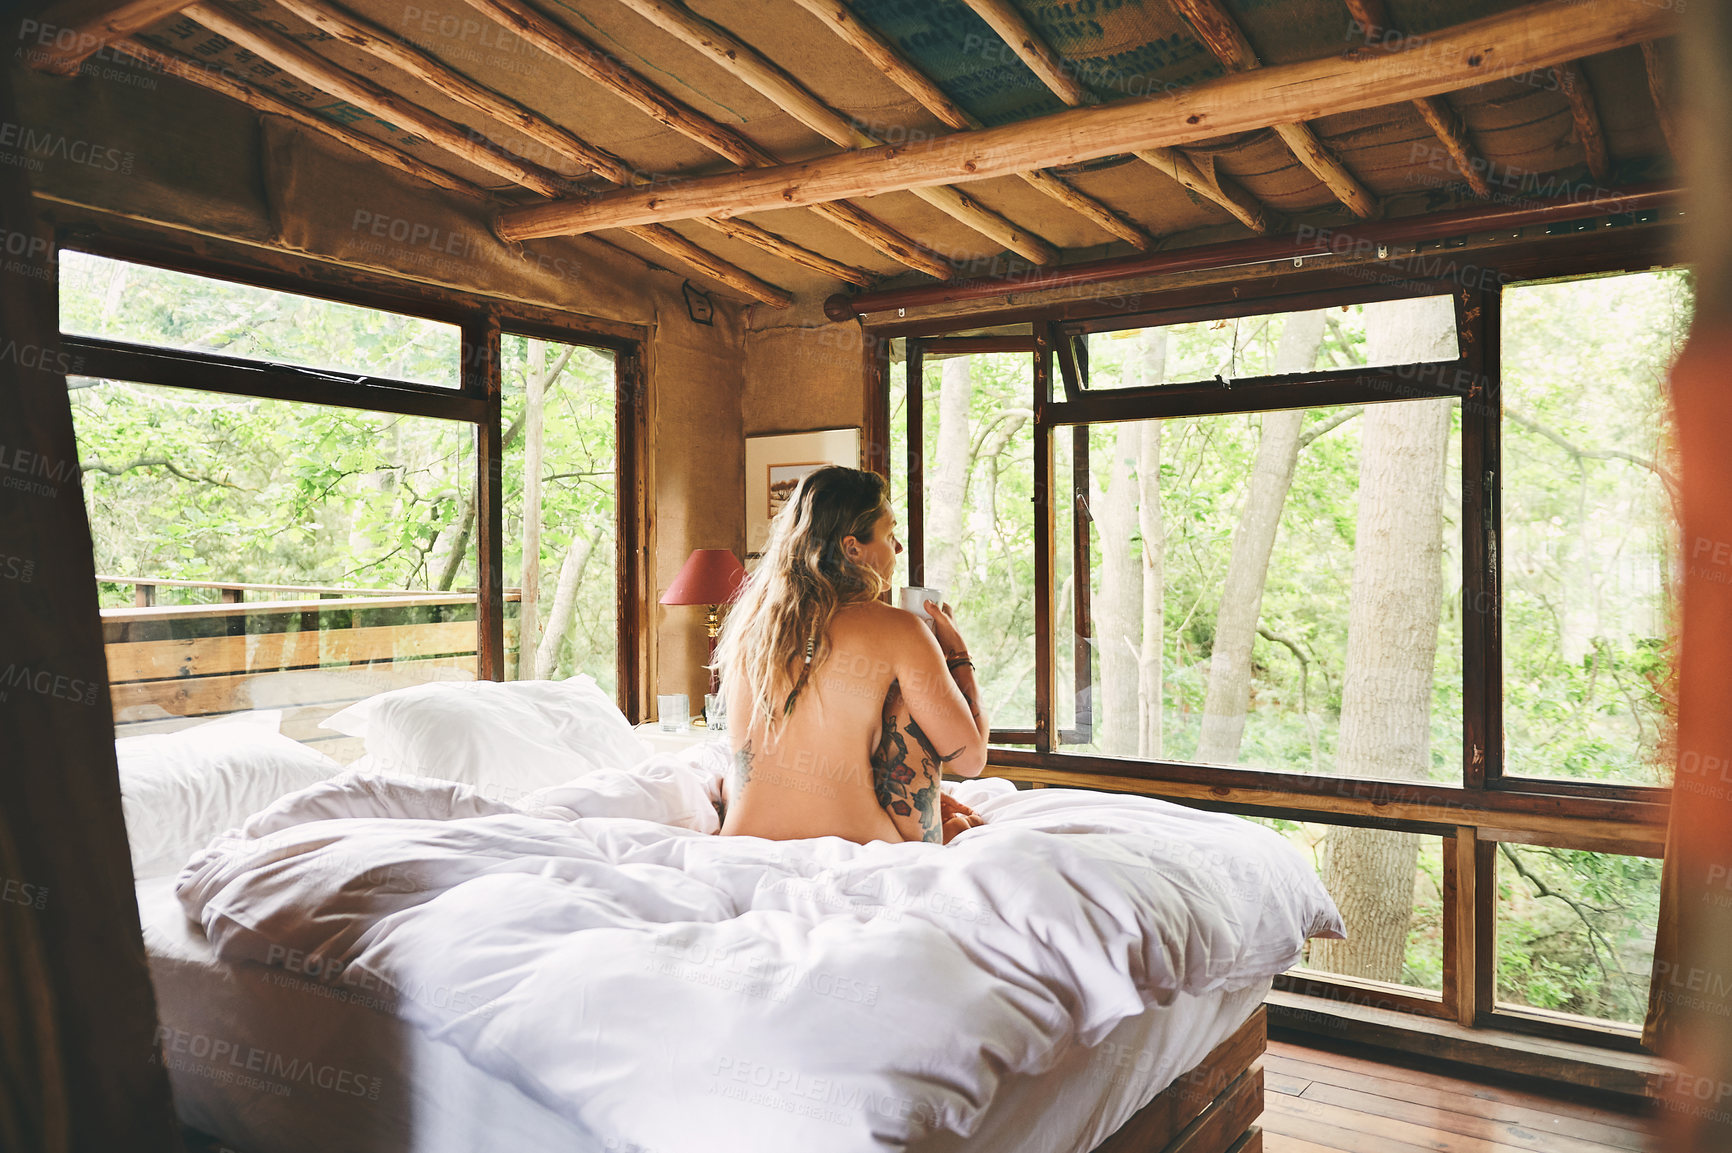 Buy stock photo Rearview shot of a woman sitting naked on a bed in a cabin